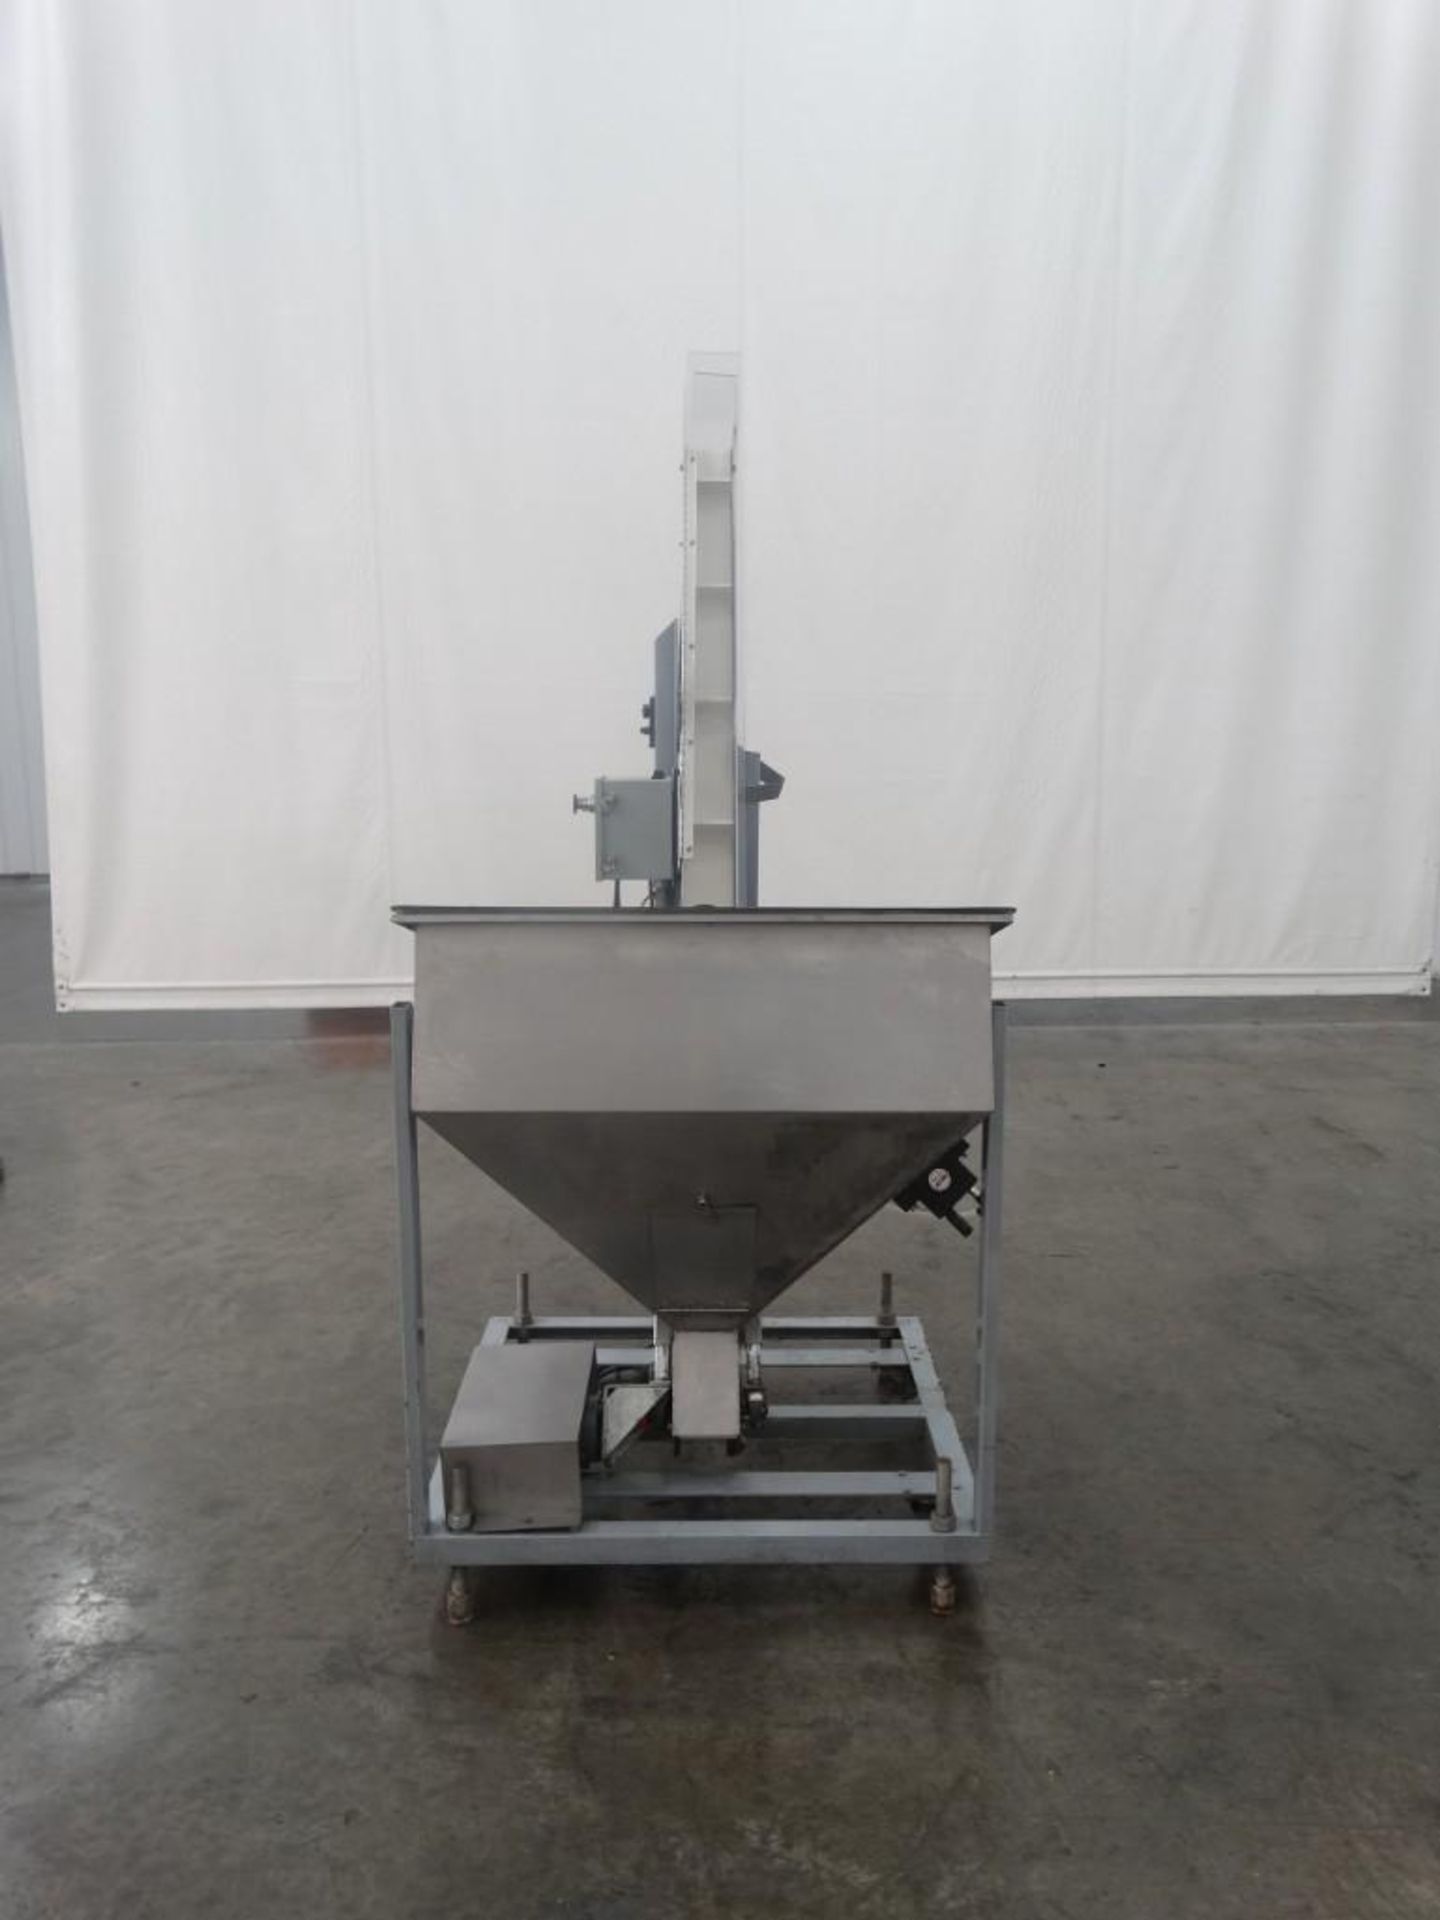 Stainless Steel Cleated Cap Elevator with 54" discharge height - Image 3 of 7